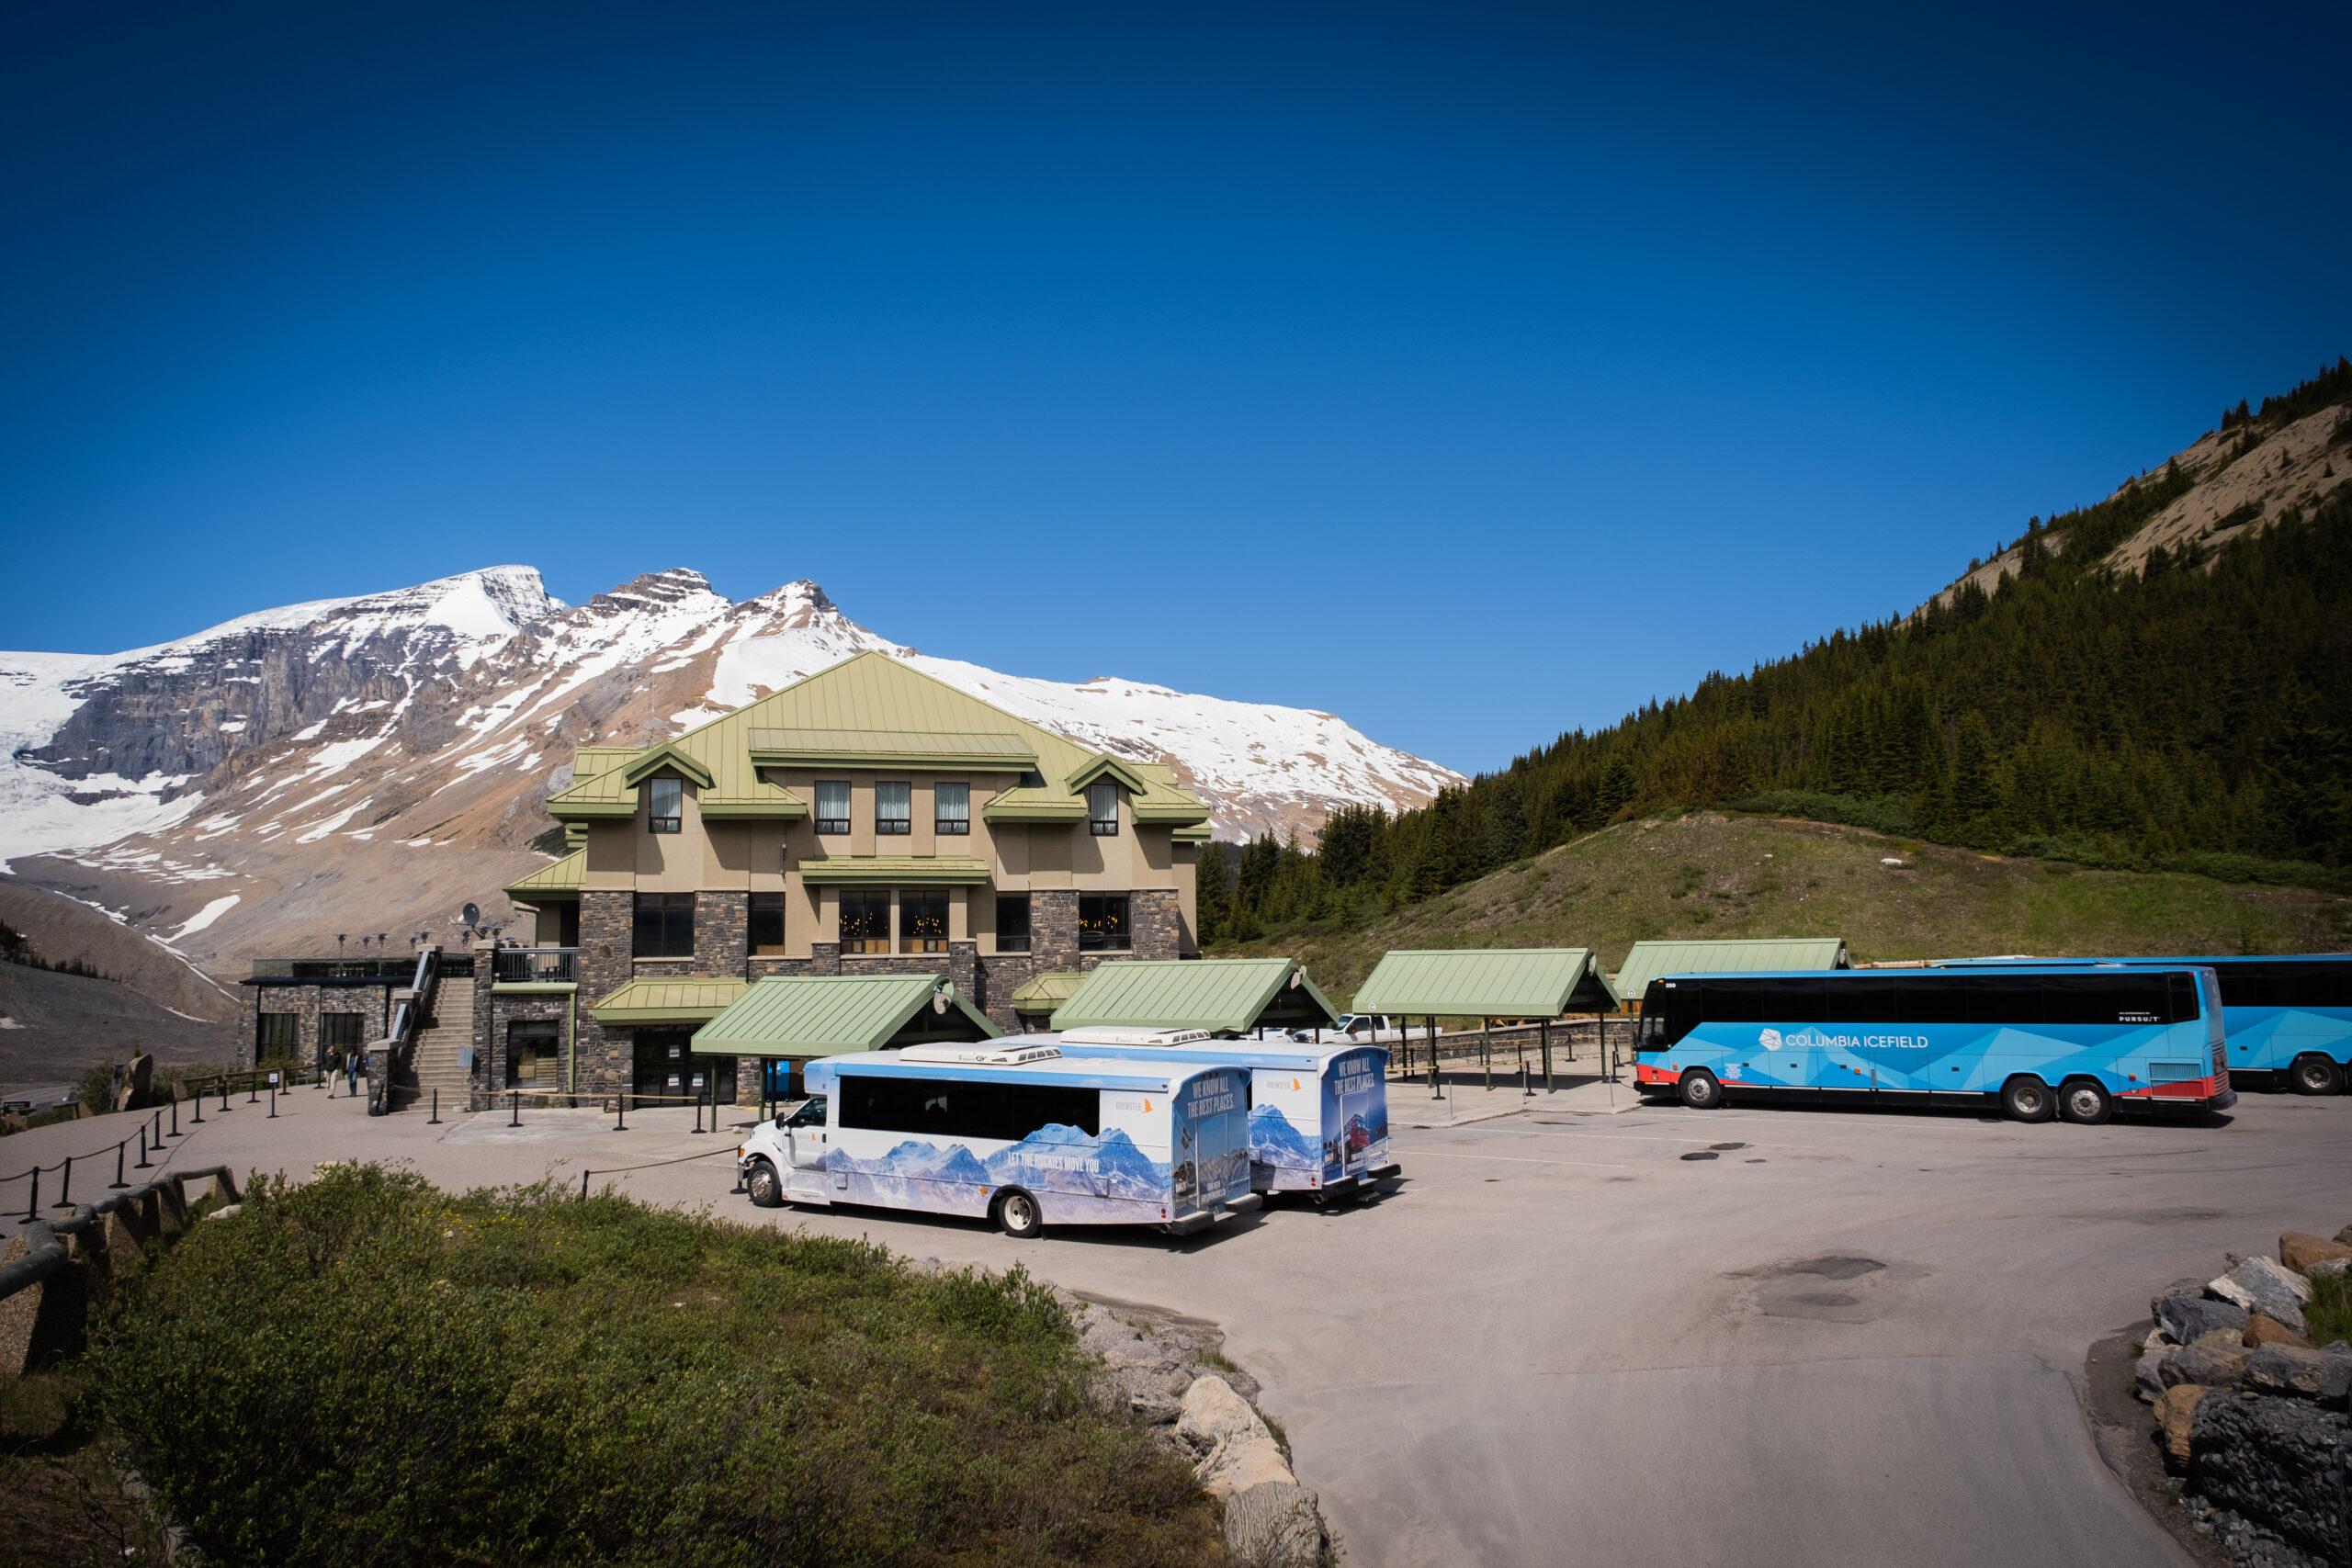 The base of the Columbia Icefields Discovery Center